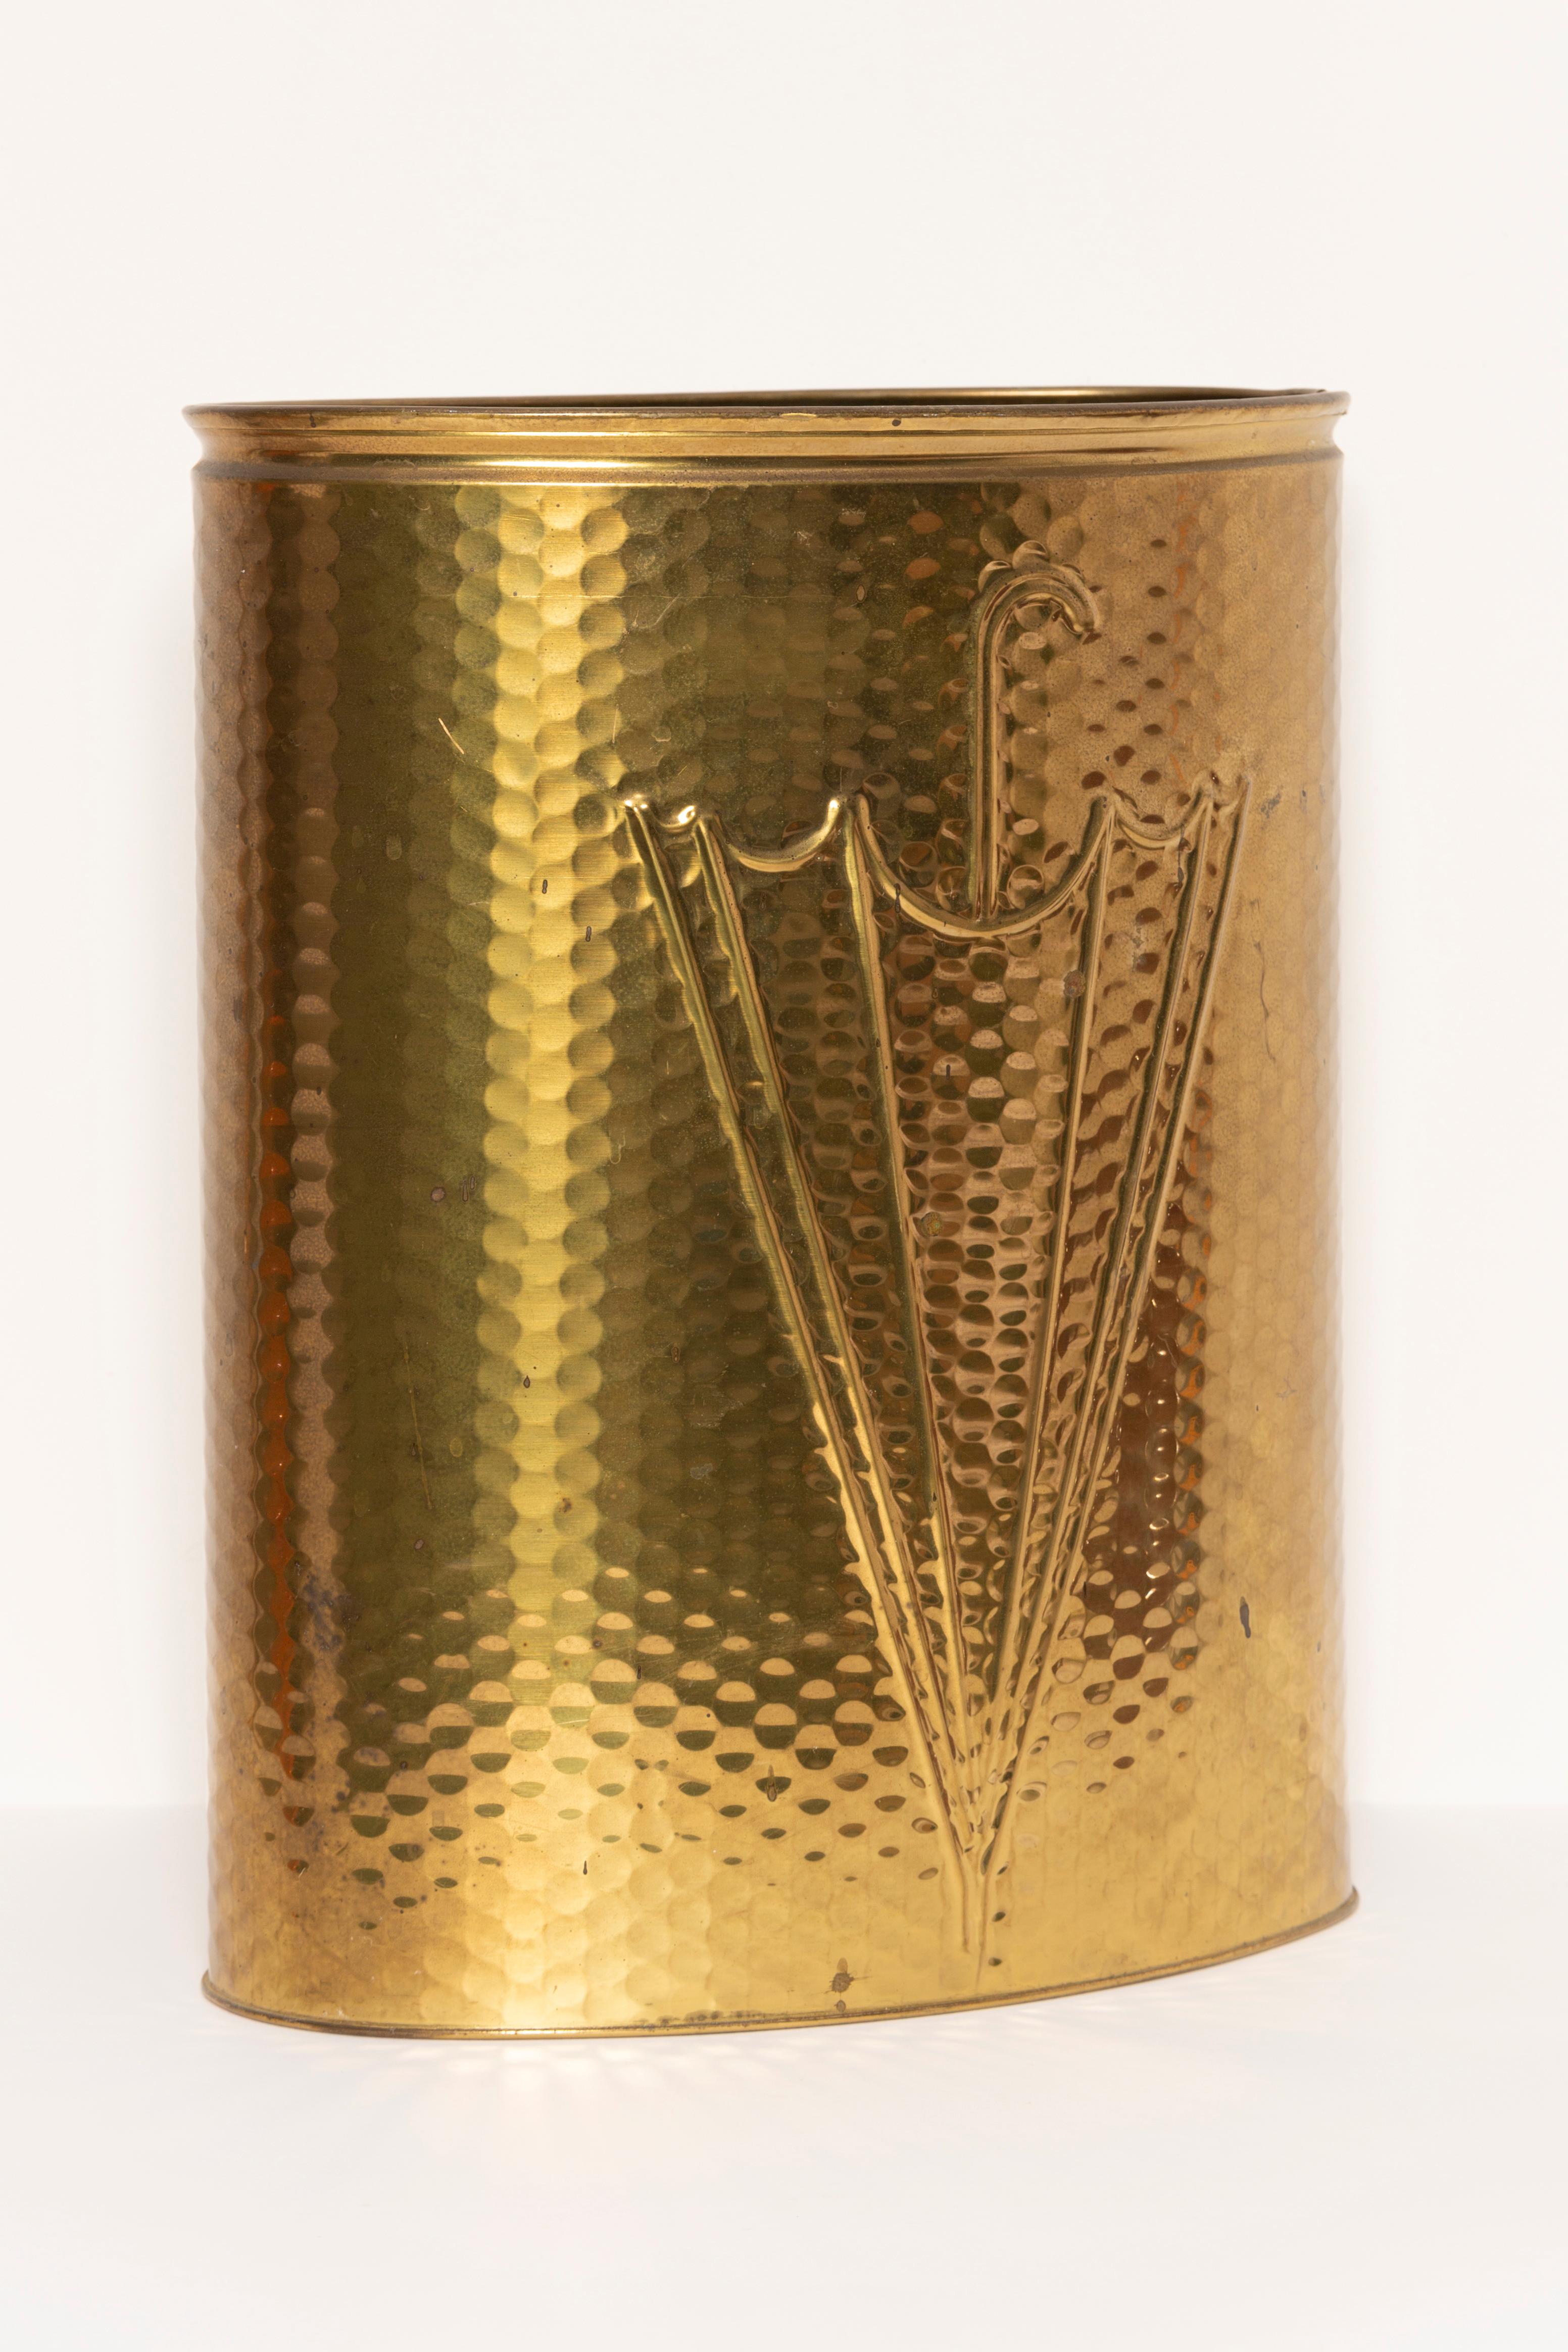 Stunning tall mid-century gold / gilt / gilded Hollywood Regency style umbrella stand / holder. Made in Florence, Italy, circa 1960. Very good original vintage condition. Only one unique piece.